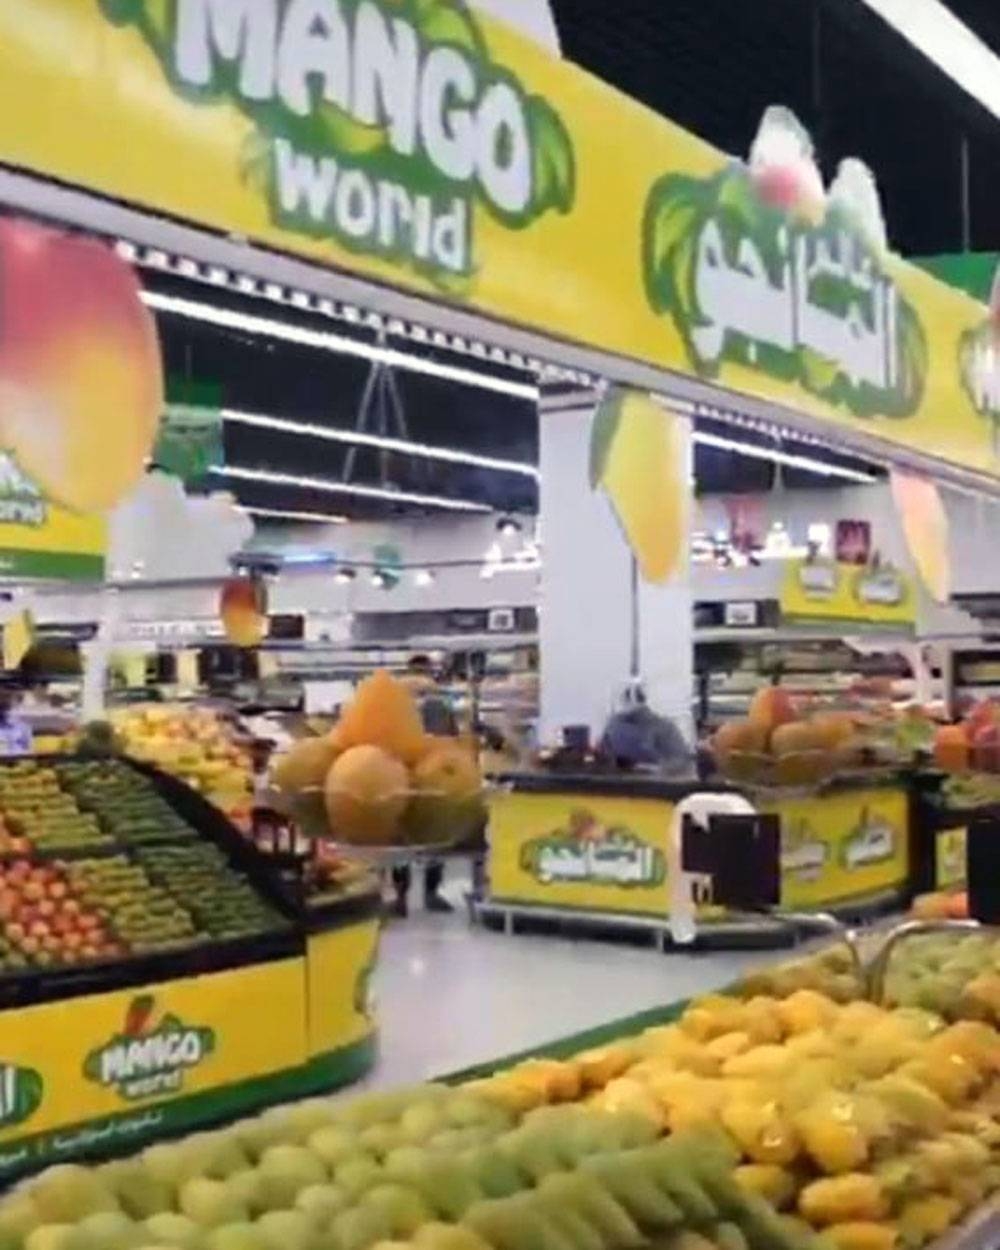 LuLu launched its mango-themed festival “Mango World” in a real-time inauguration by Indian Ambassador Dr. Ausaf Sayeed in the presence of Ibrahim Albidah, general manager, Ministry of Agriculture, Riyadh, and LuLu officials.